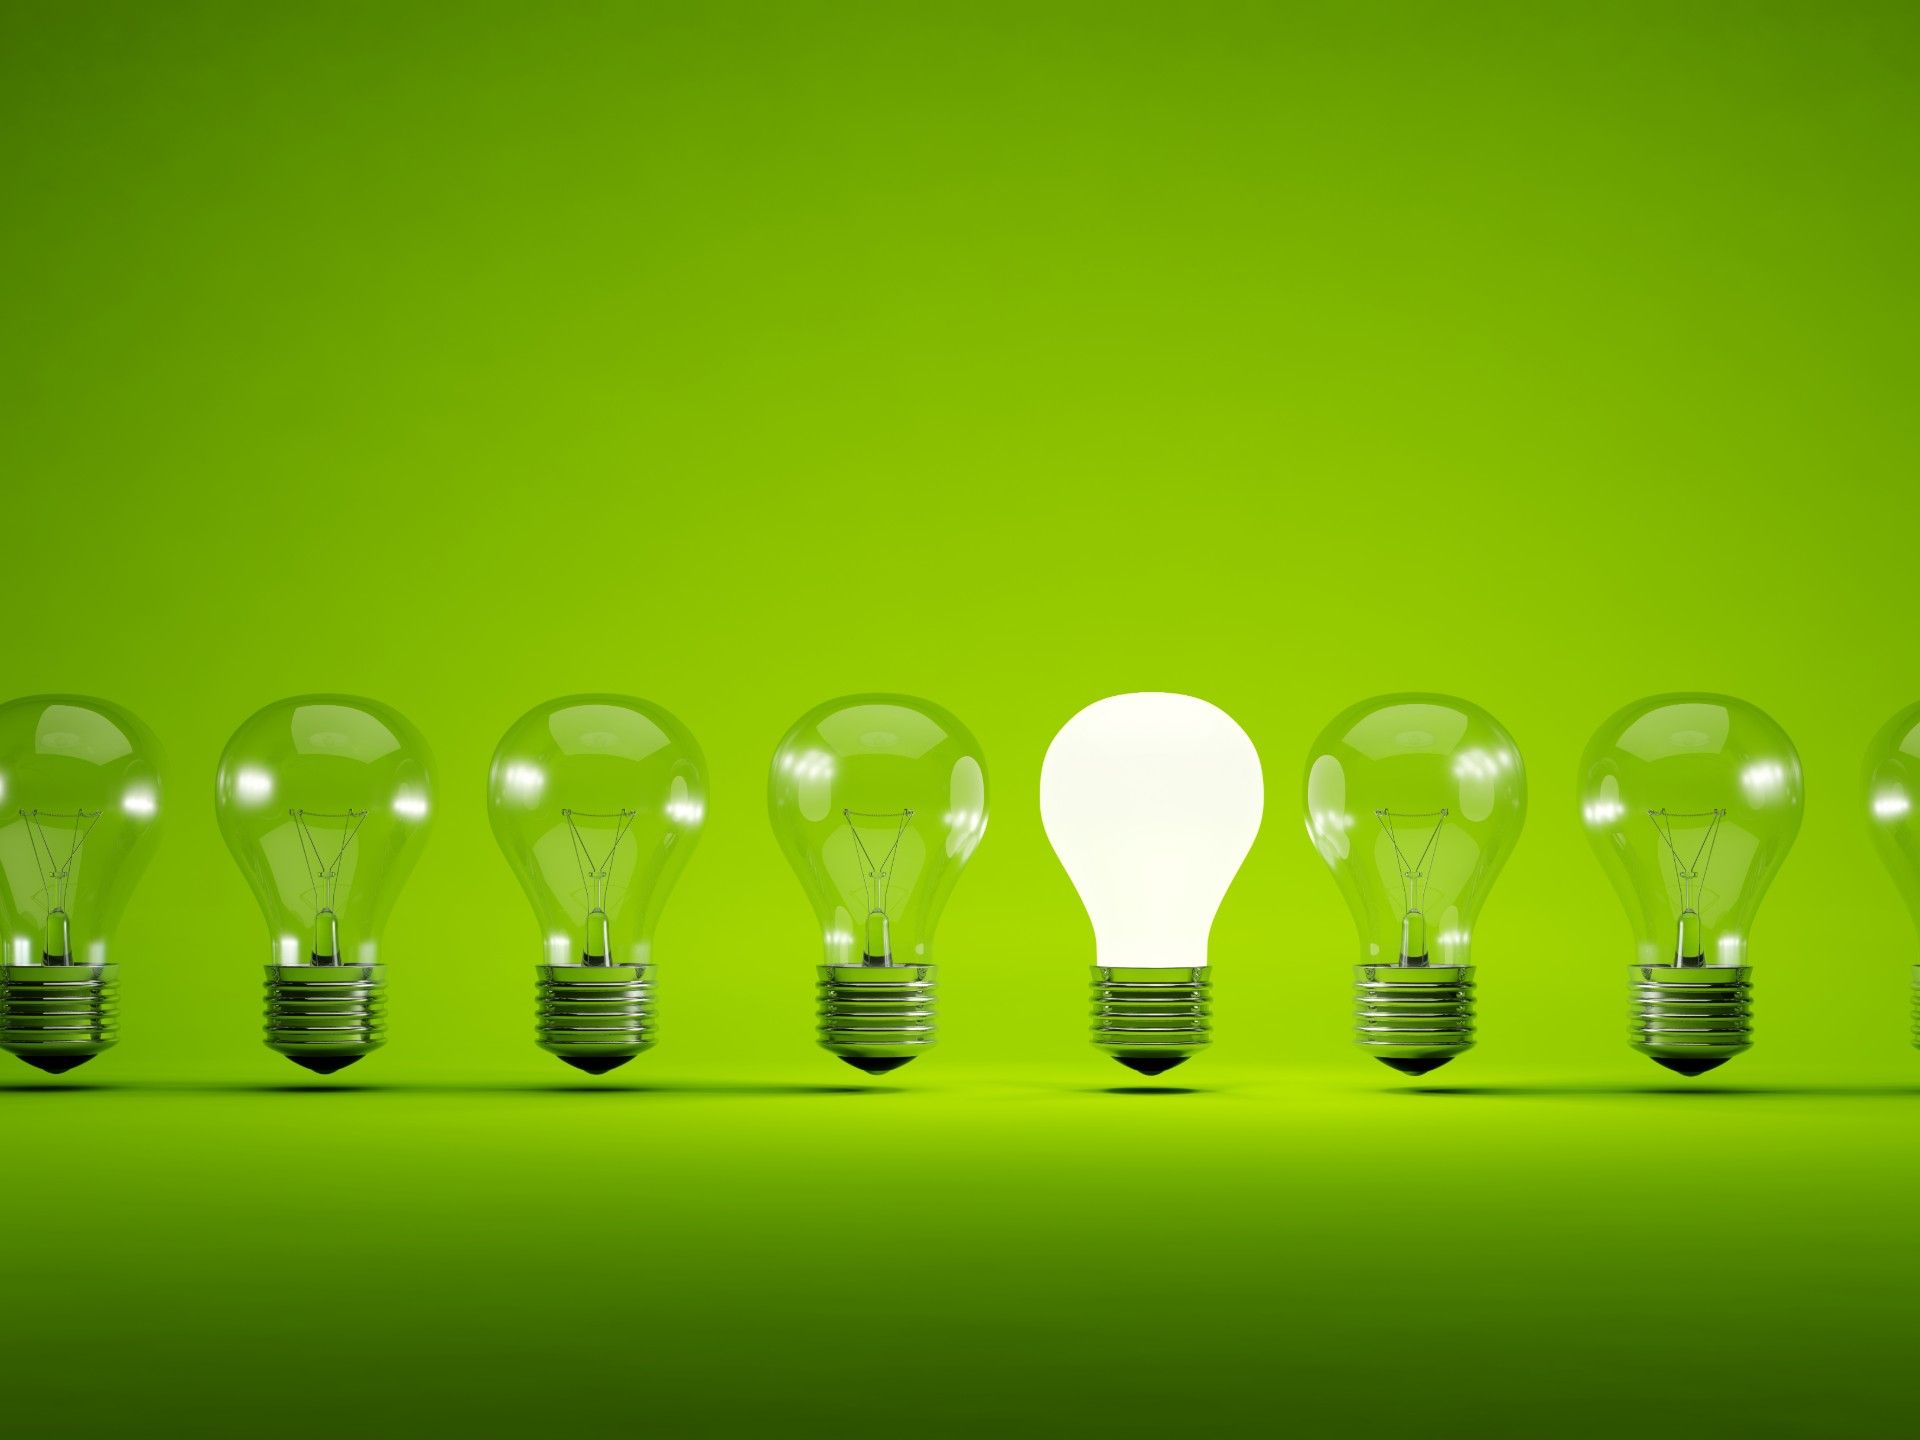 One in a row of lightbulbs is lit up against a green background - Bulb